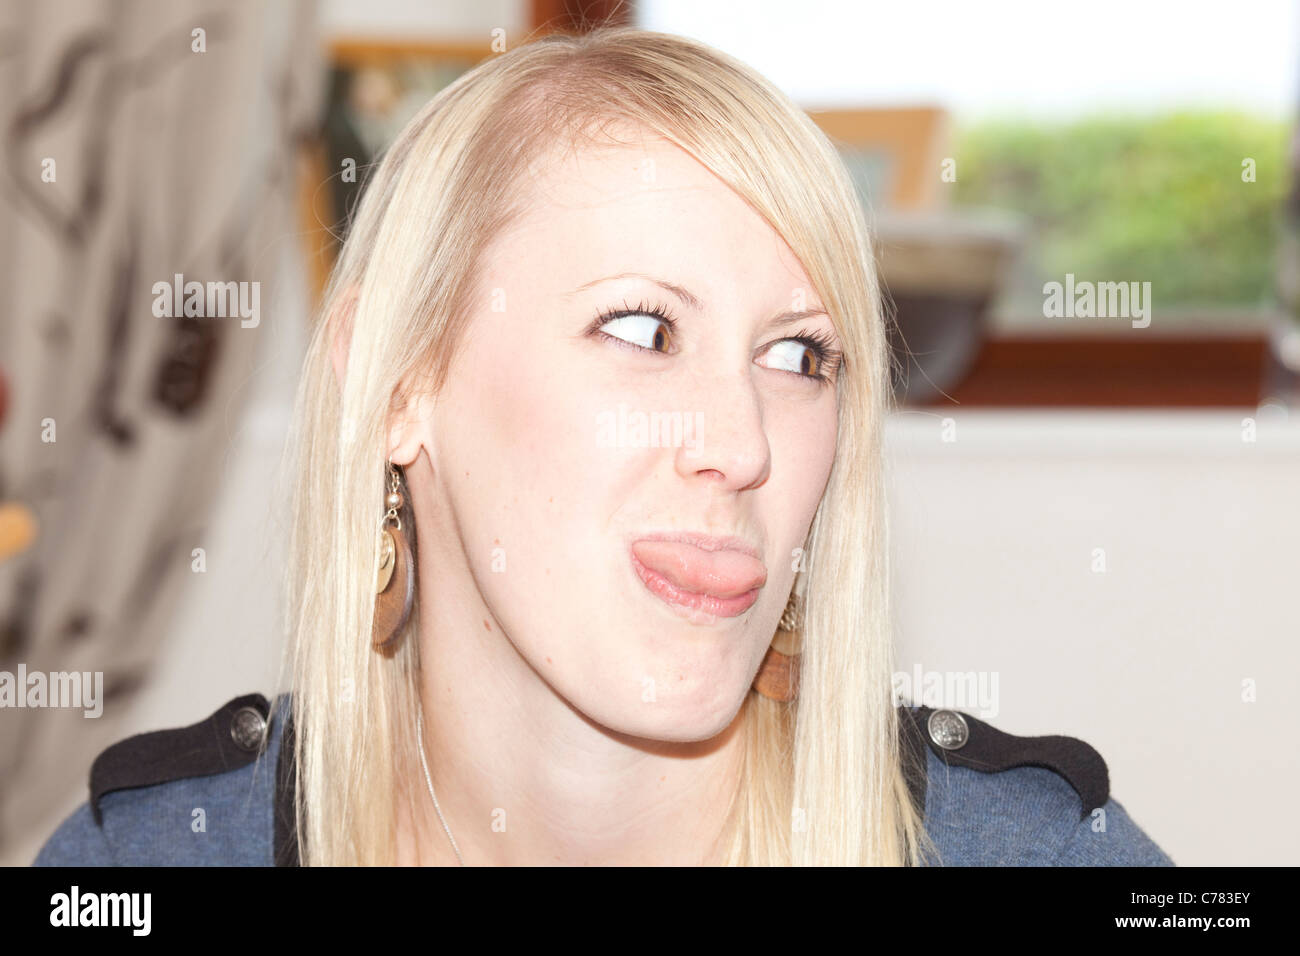 teenage girl making funny faces Stock Photo